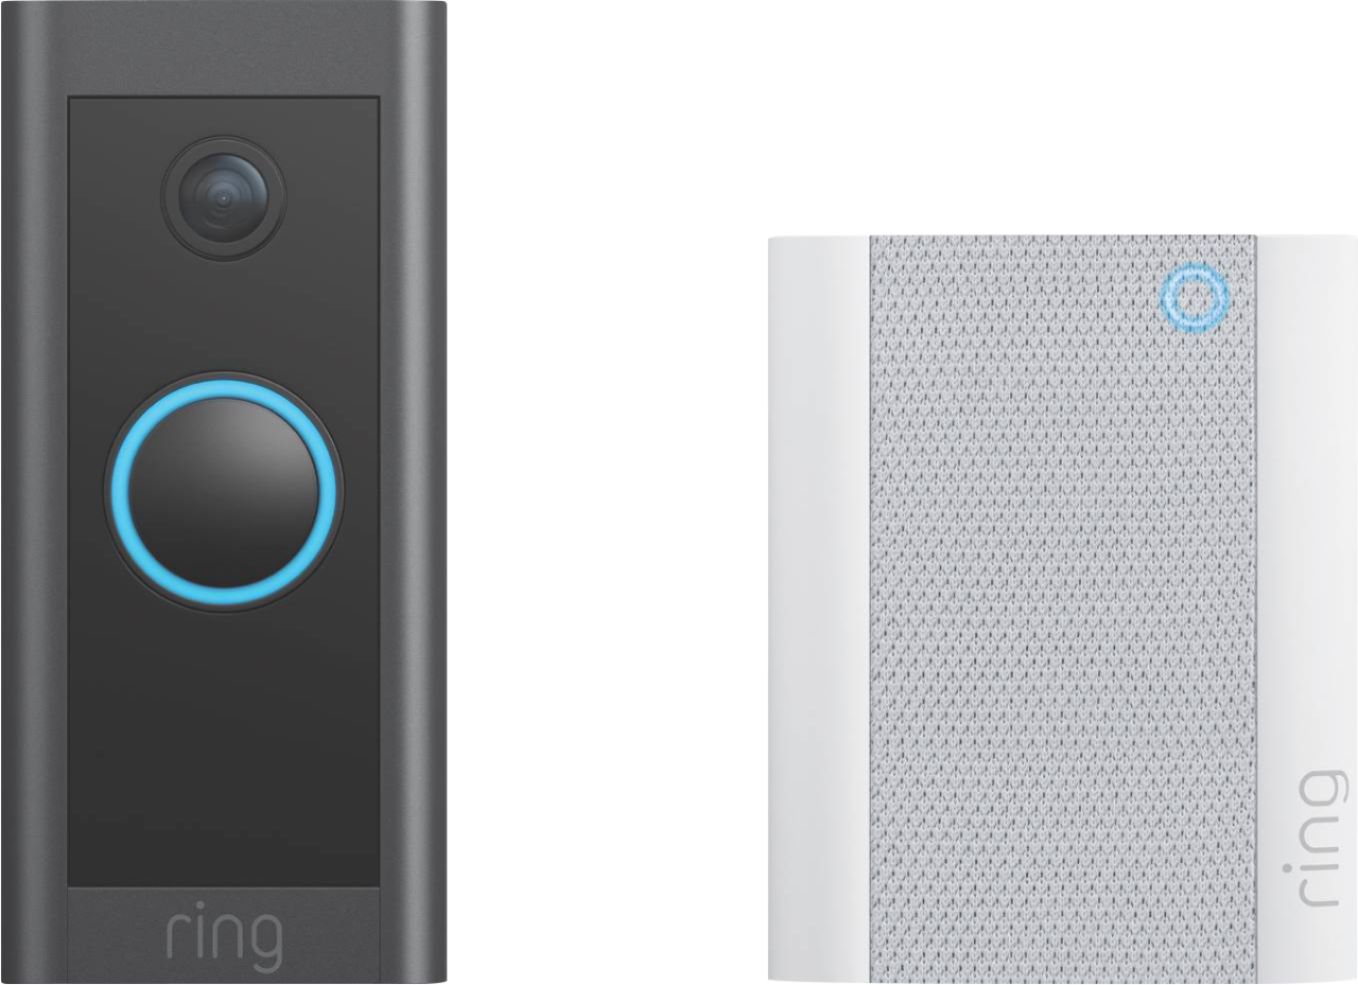 Ring - Wi-Fi Video Doorbell - Wired + Chime - Black